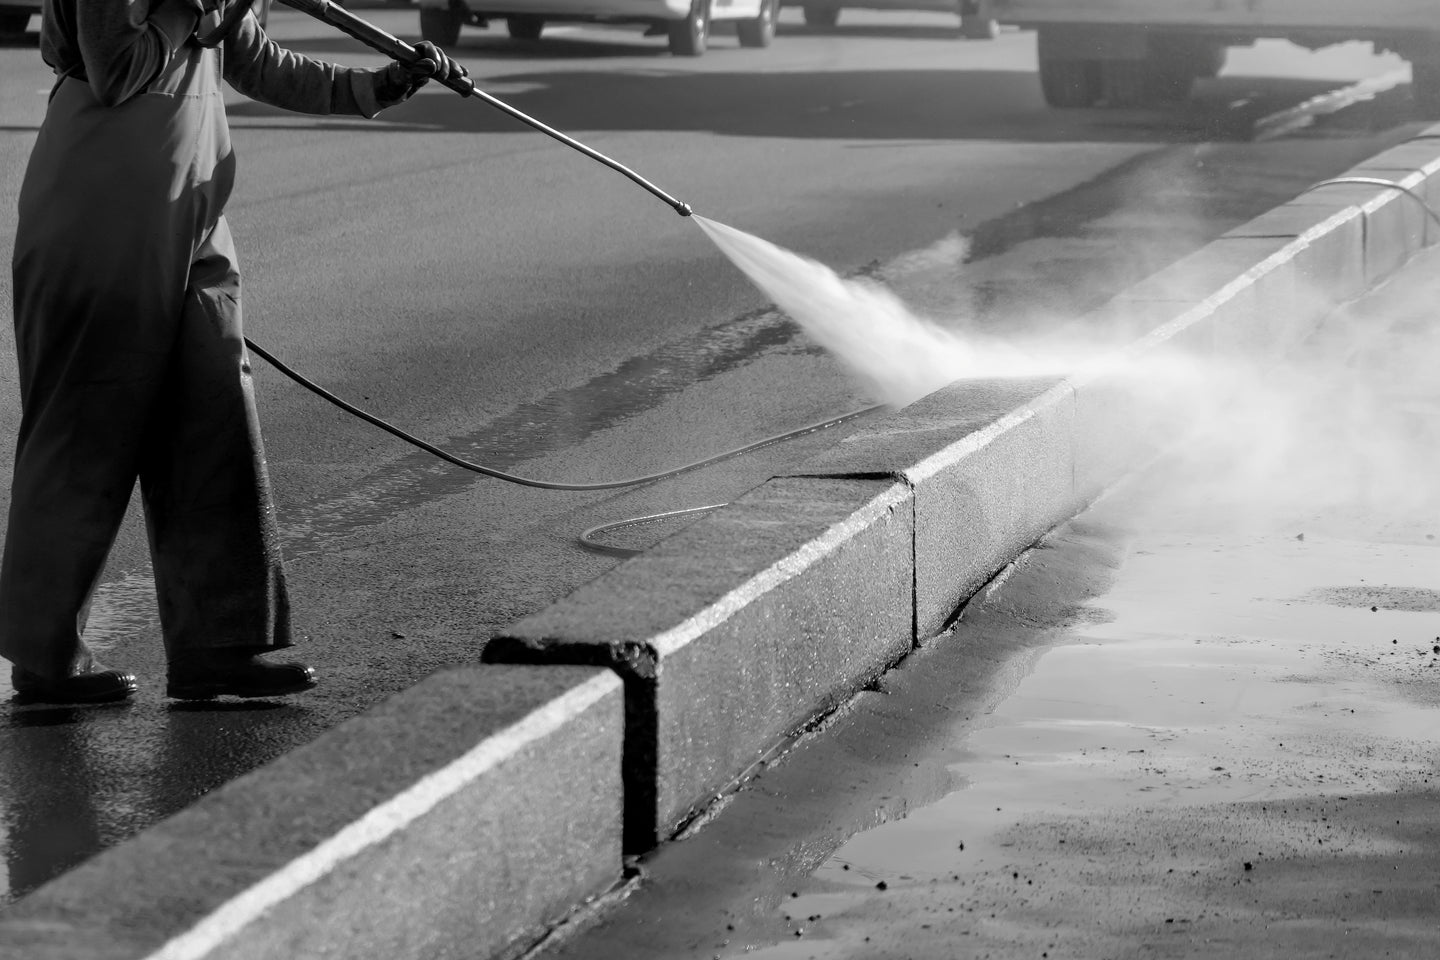 Pressure washing curb outside commercial building